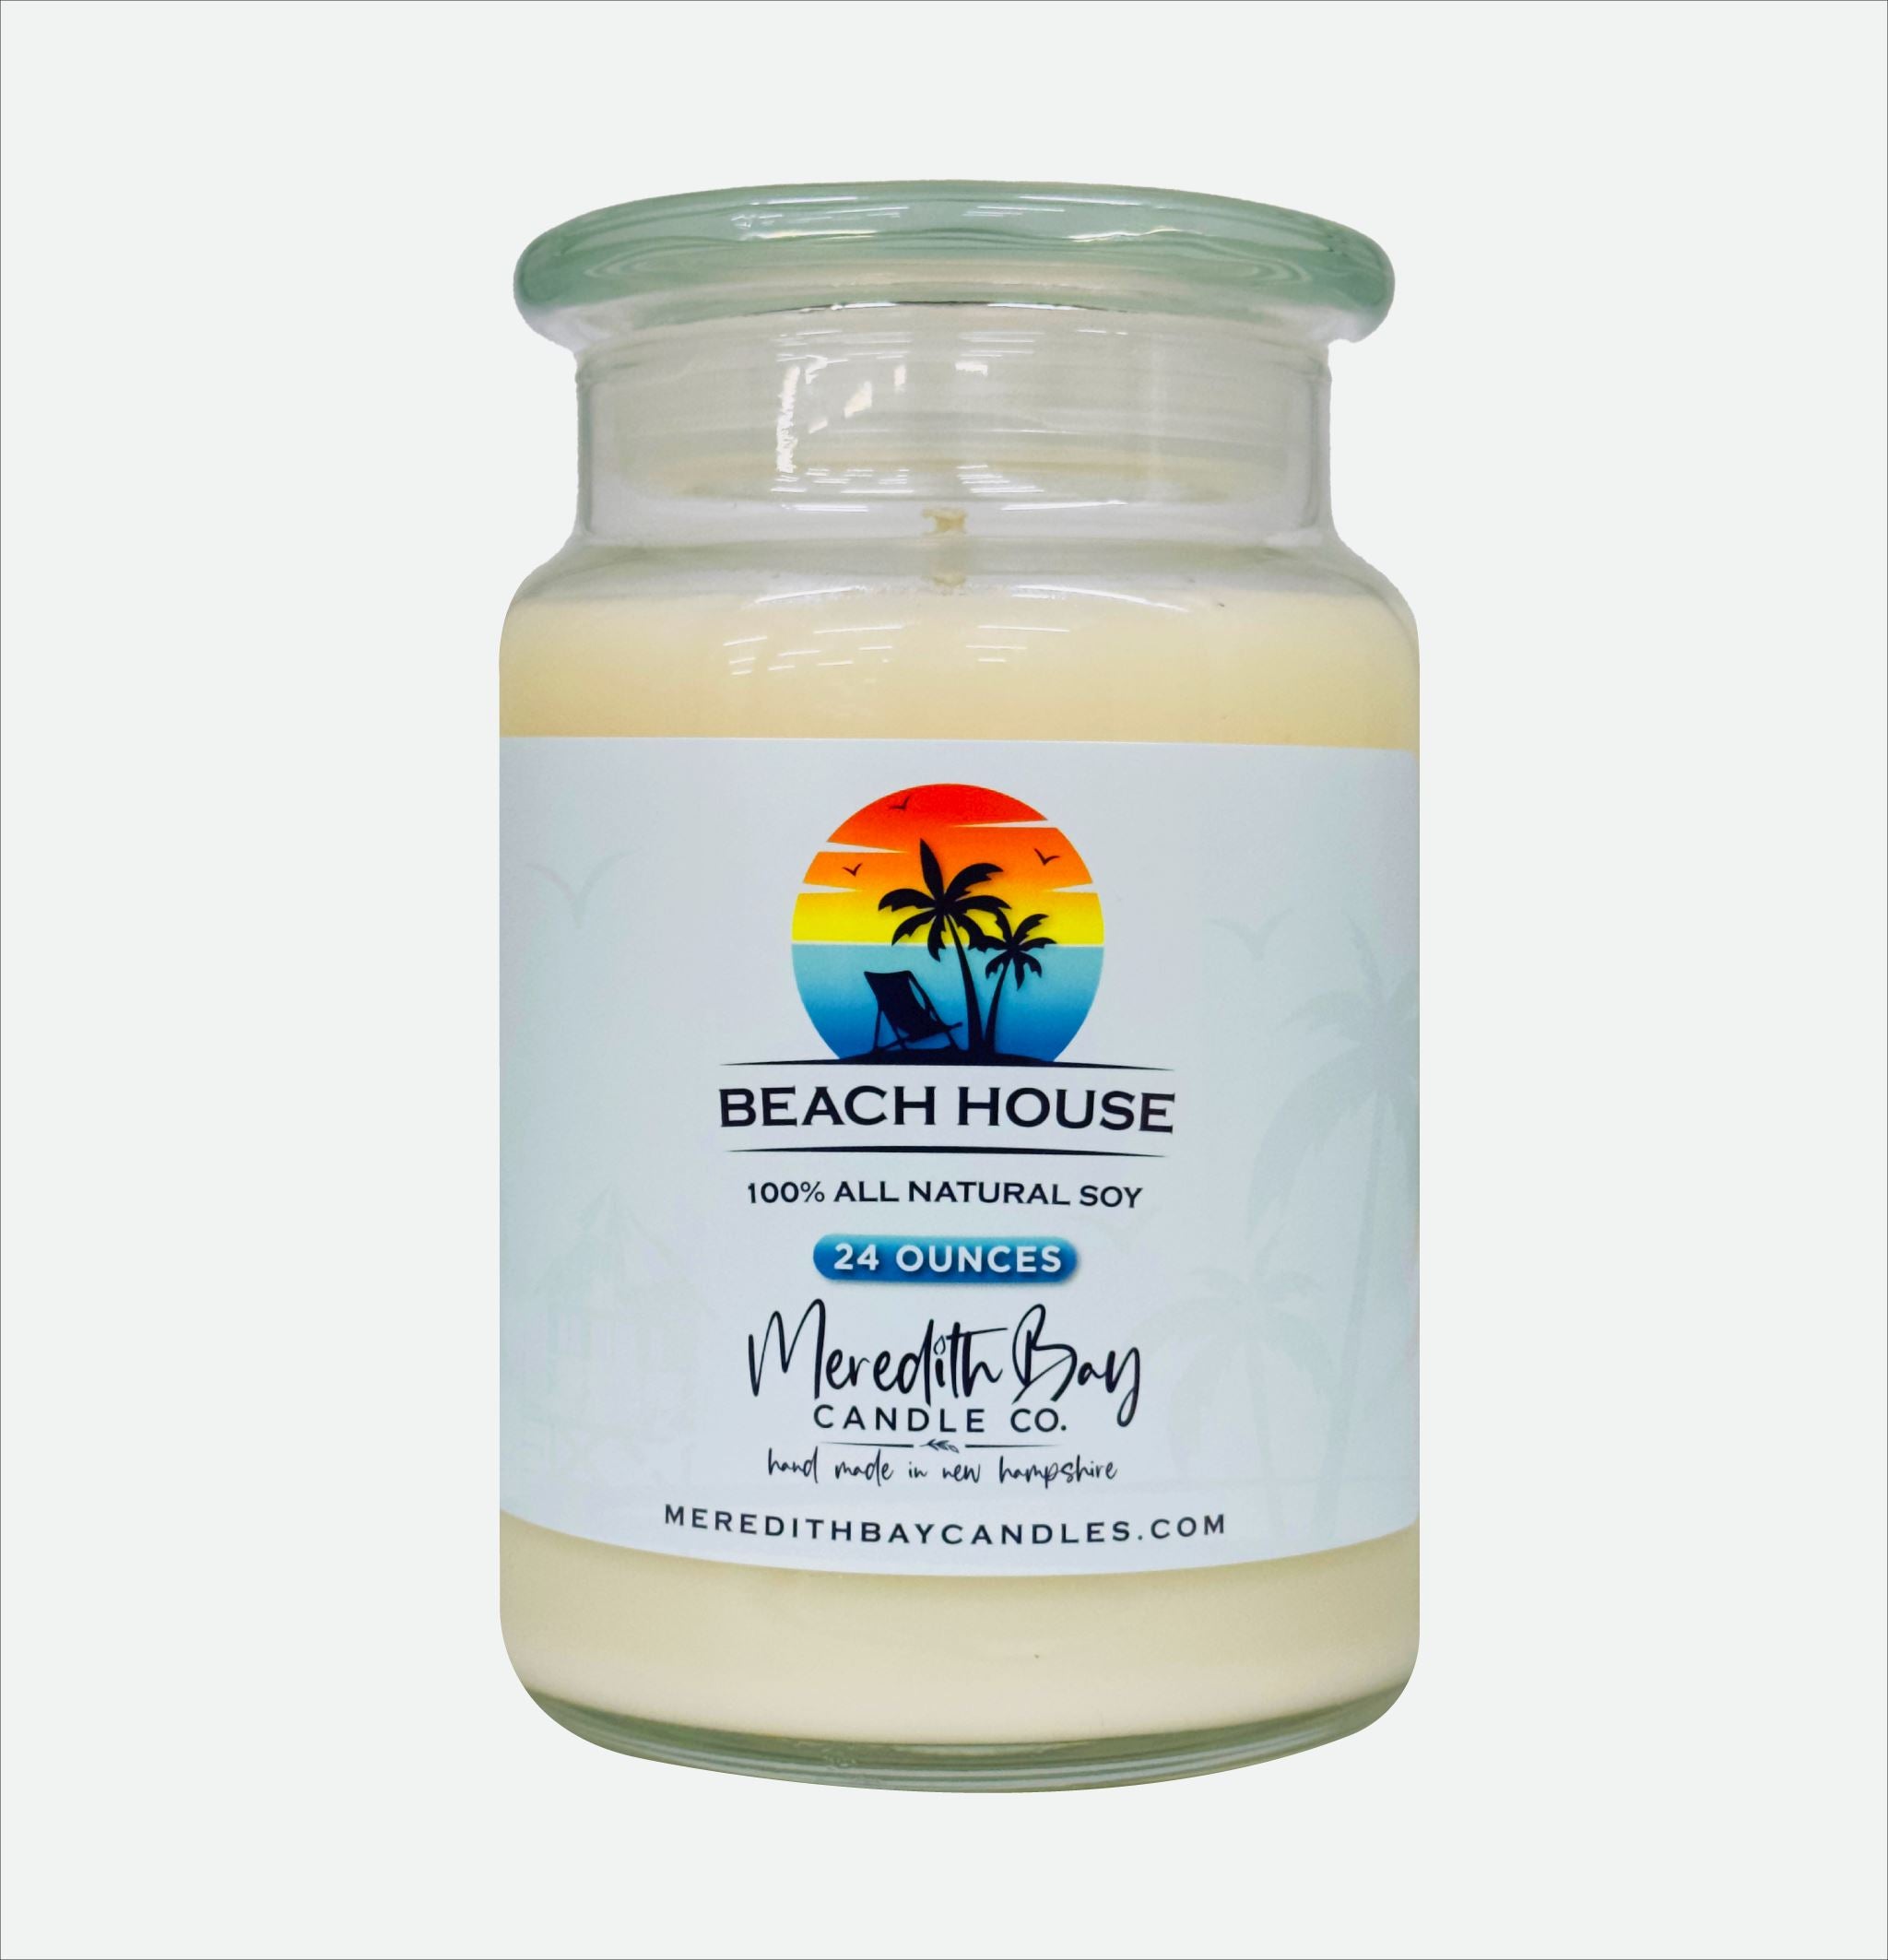 Beach House Soy Candle Soy Candle Meredith Bay Candle Co 24.0 Oz 